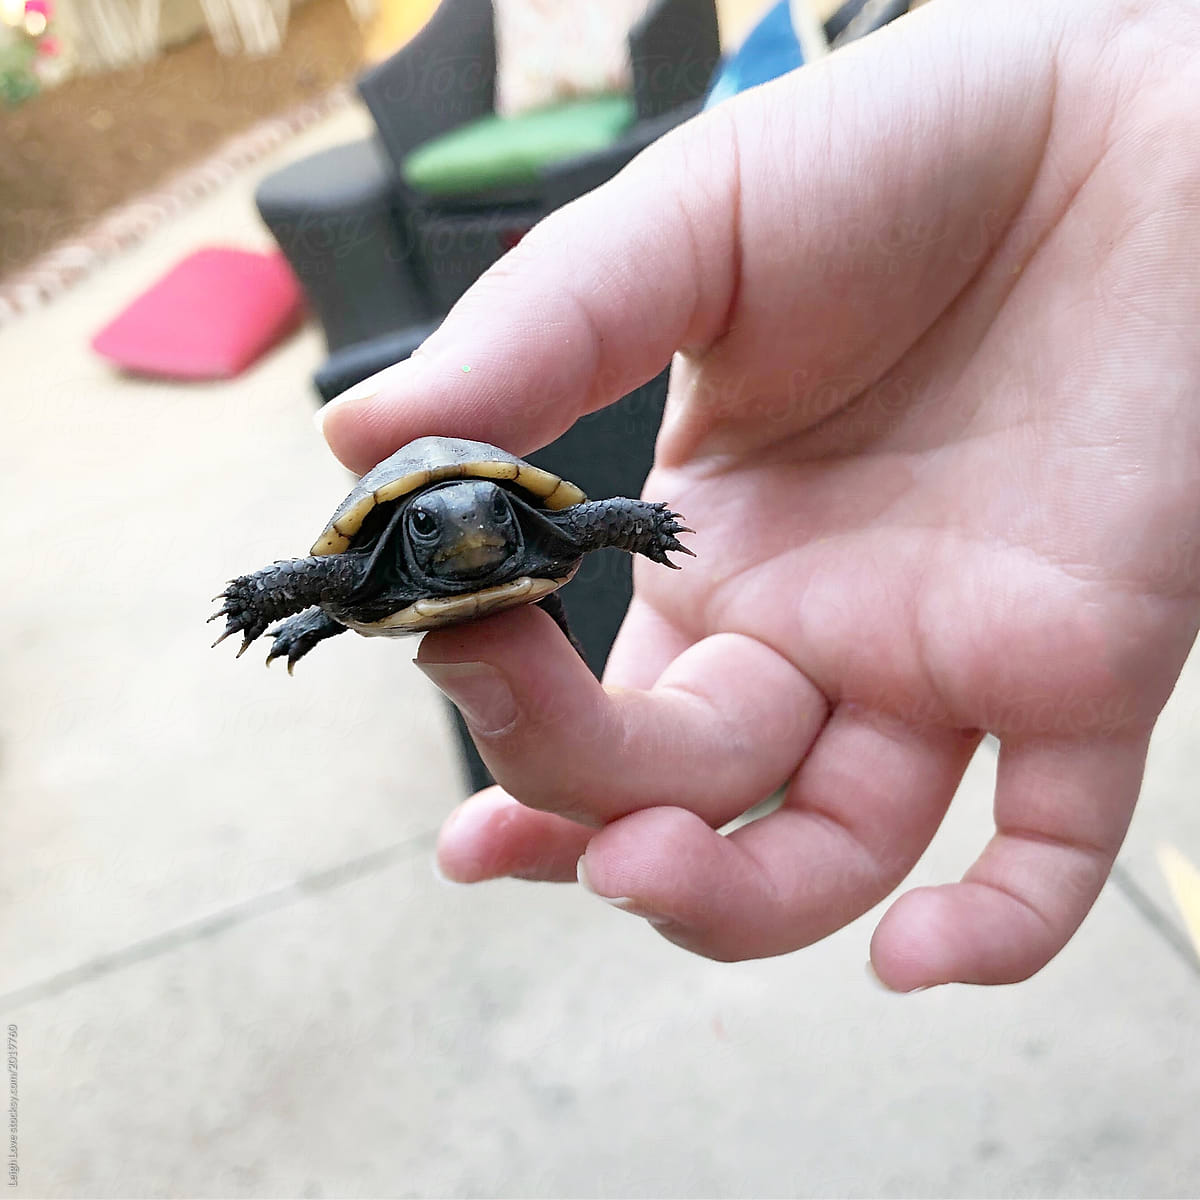 Hand Holding a Baby Eastern Box Turtle